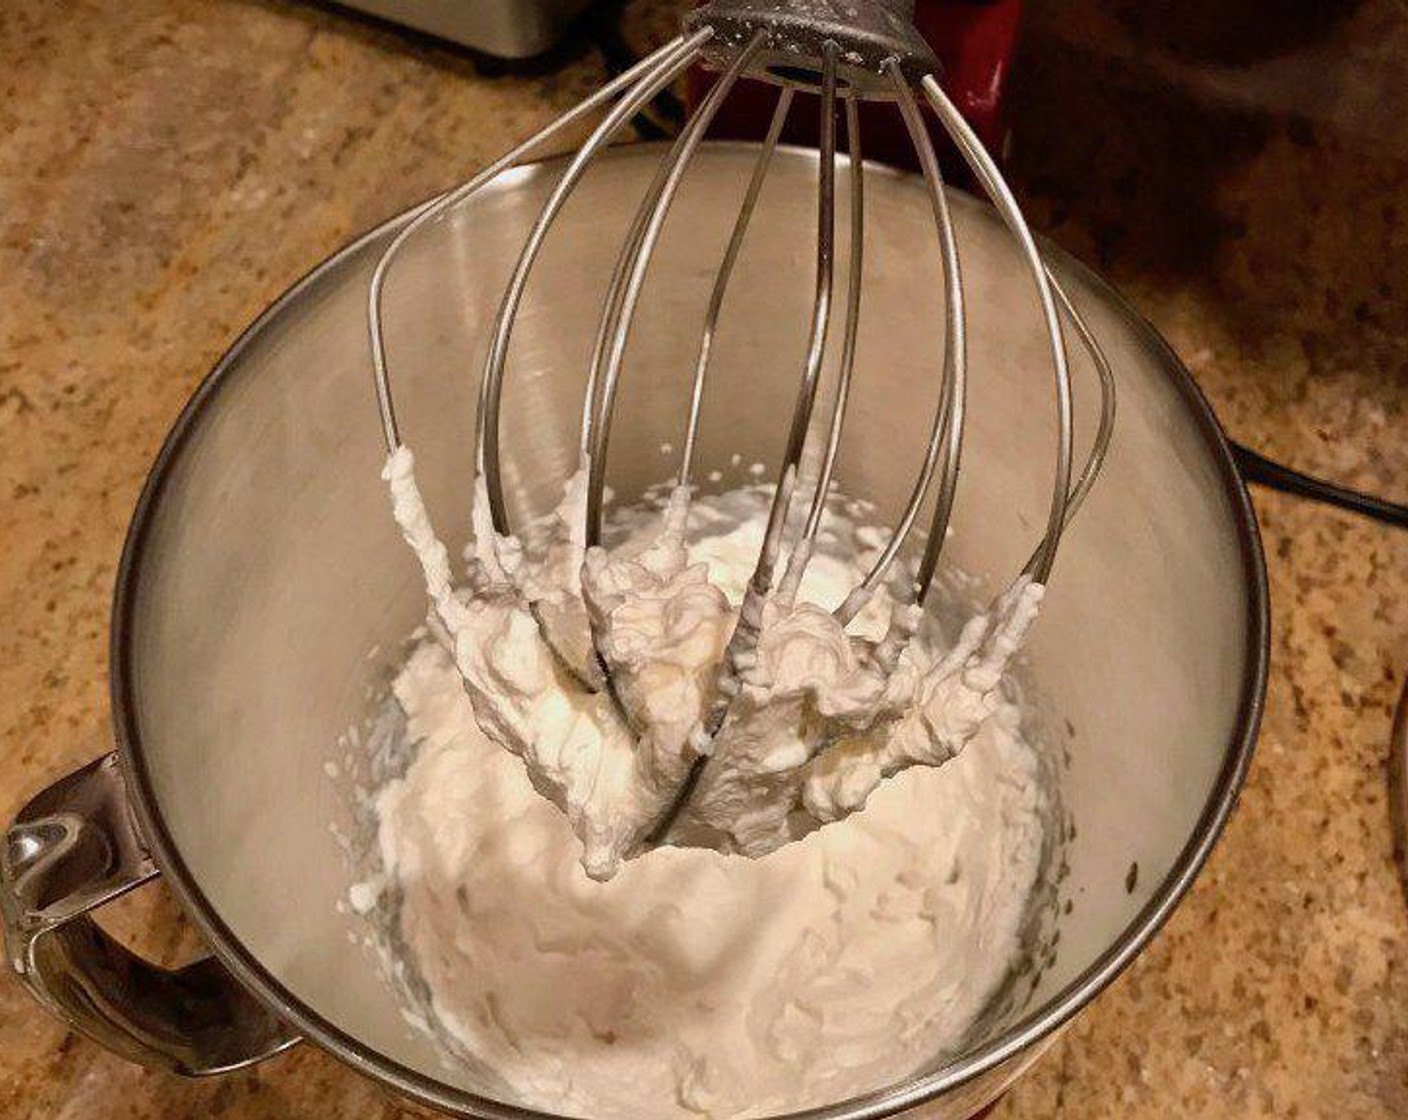 step 8 Remove the mixing bowl from the freezer and pour Heavy Cream (1 cup) into bowl. Beat on high for 2 minutes until fluffy, then add Hot Chocolate Mix (1 cup) and continue to beat until stiff peaks form. Keep refrigerated.